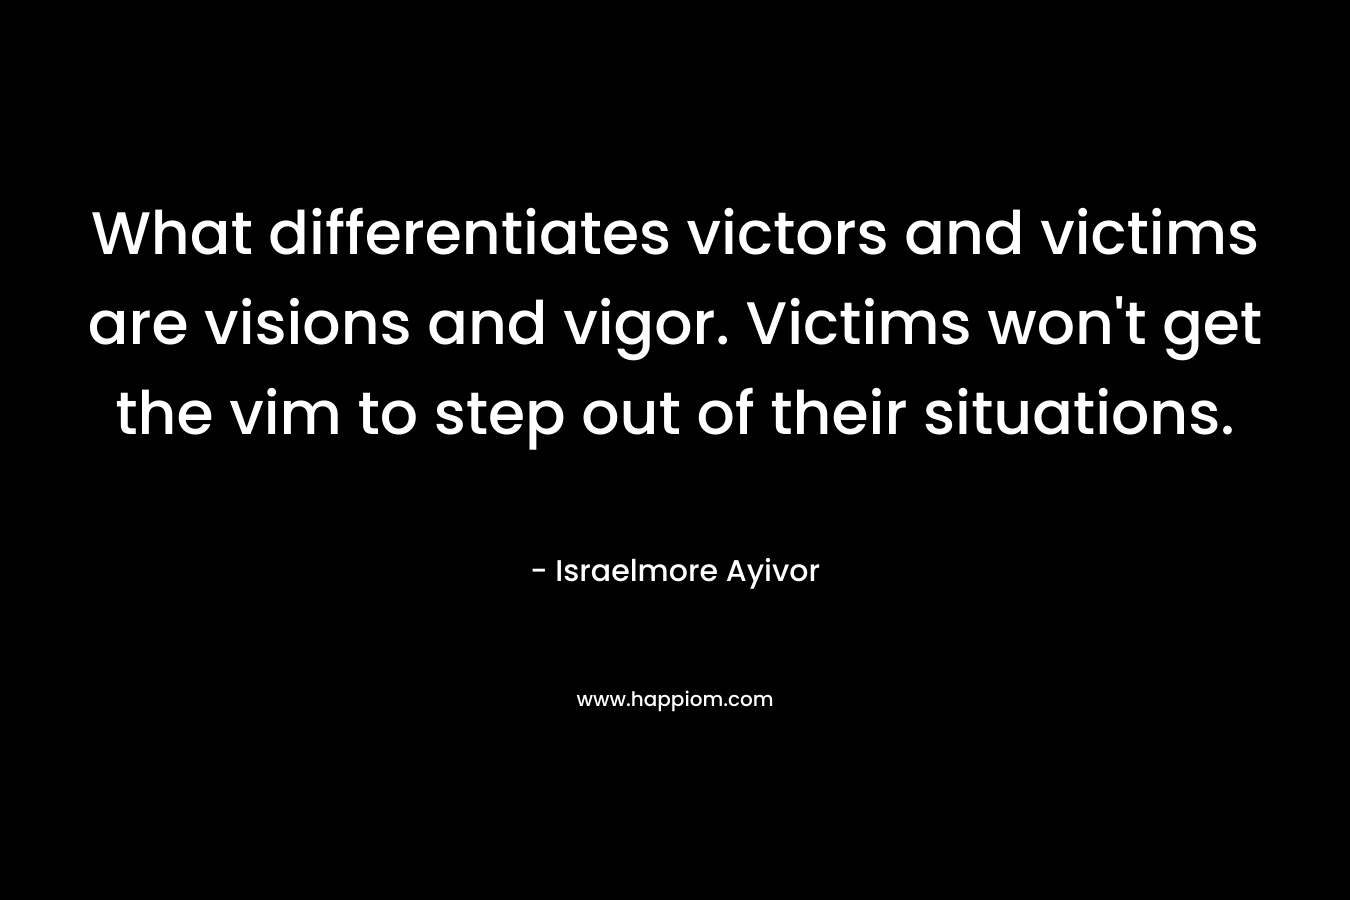 What differentiates victors and victims are visions and vigor. Victims won’t get the vim to step out of their situations. – Israelmore Ayivor